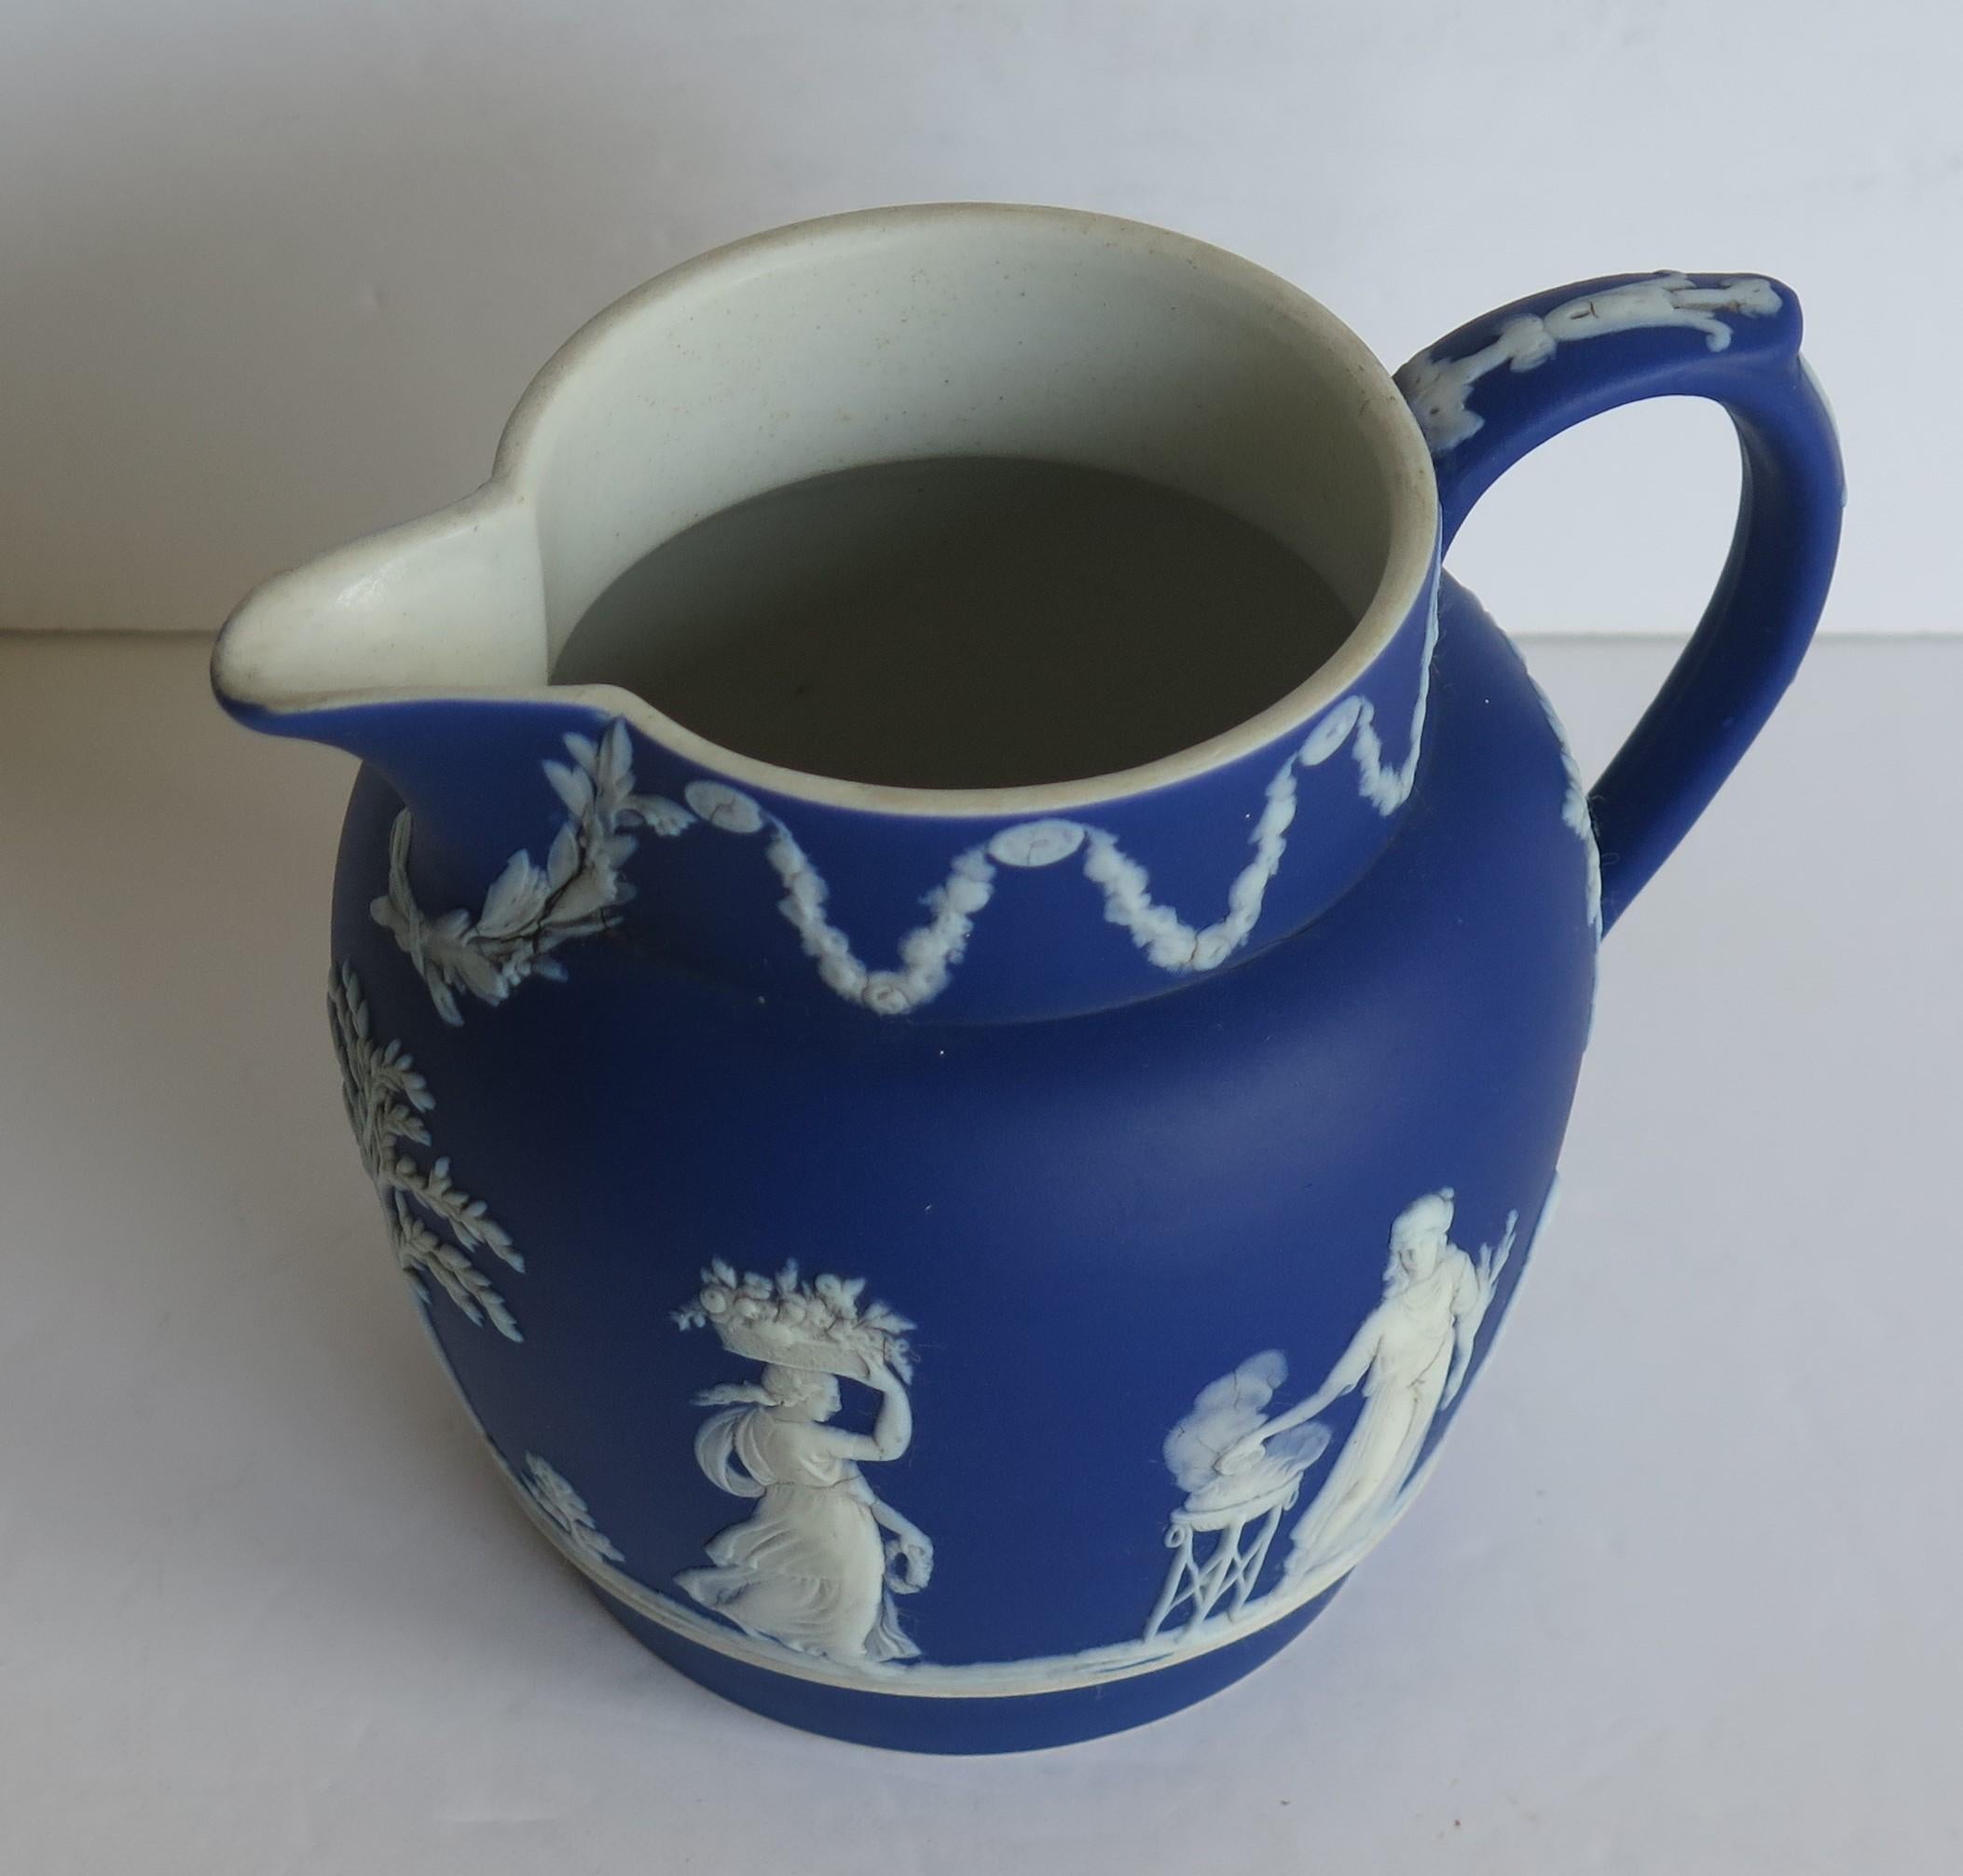 19th Century Wedgwood Jasperware Jug or Pitcher Classical Figures Fully Marked, circa 1900